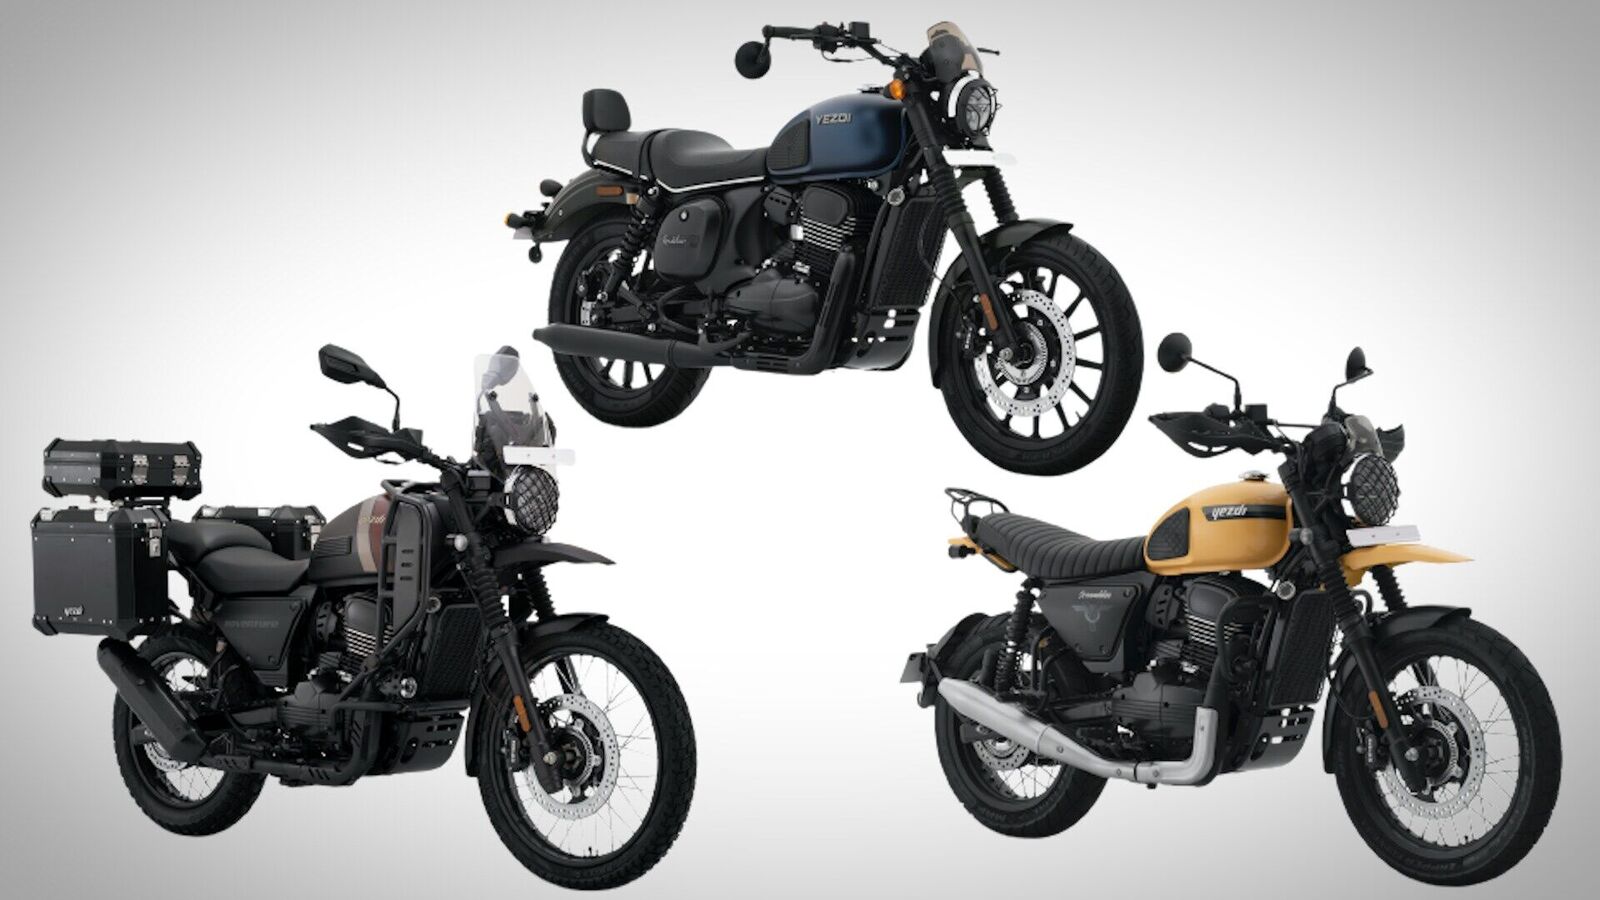 Yezdi Roadster Scrambler And Adventure Bikes Launched Price Features Specs Bike News